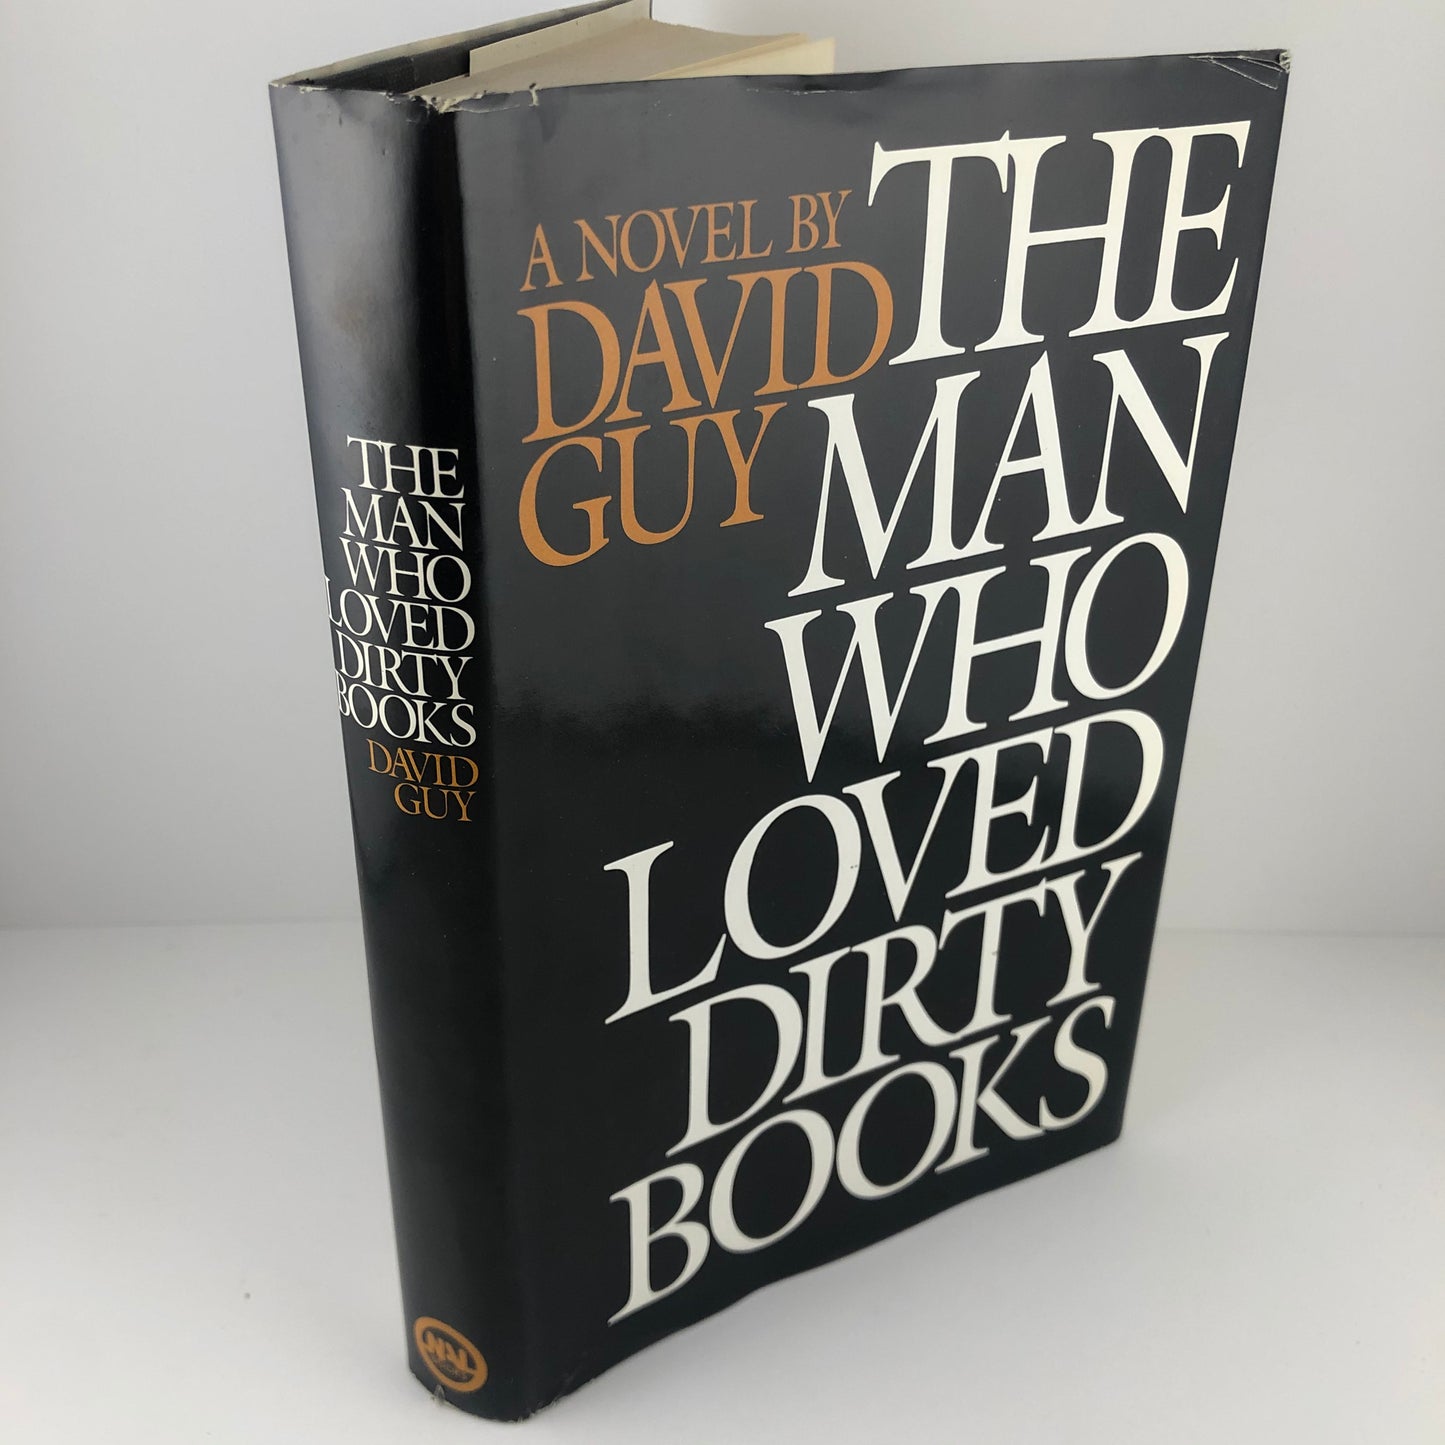 The Man Who Loved Dirty Books